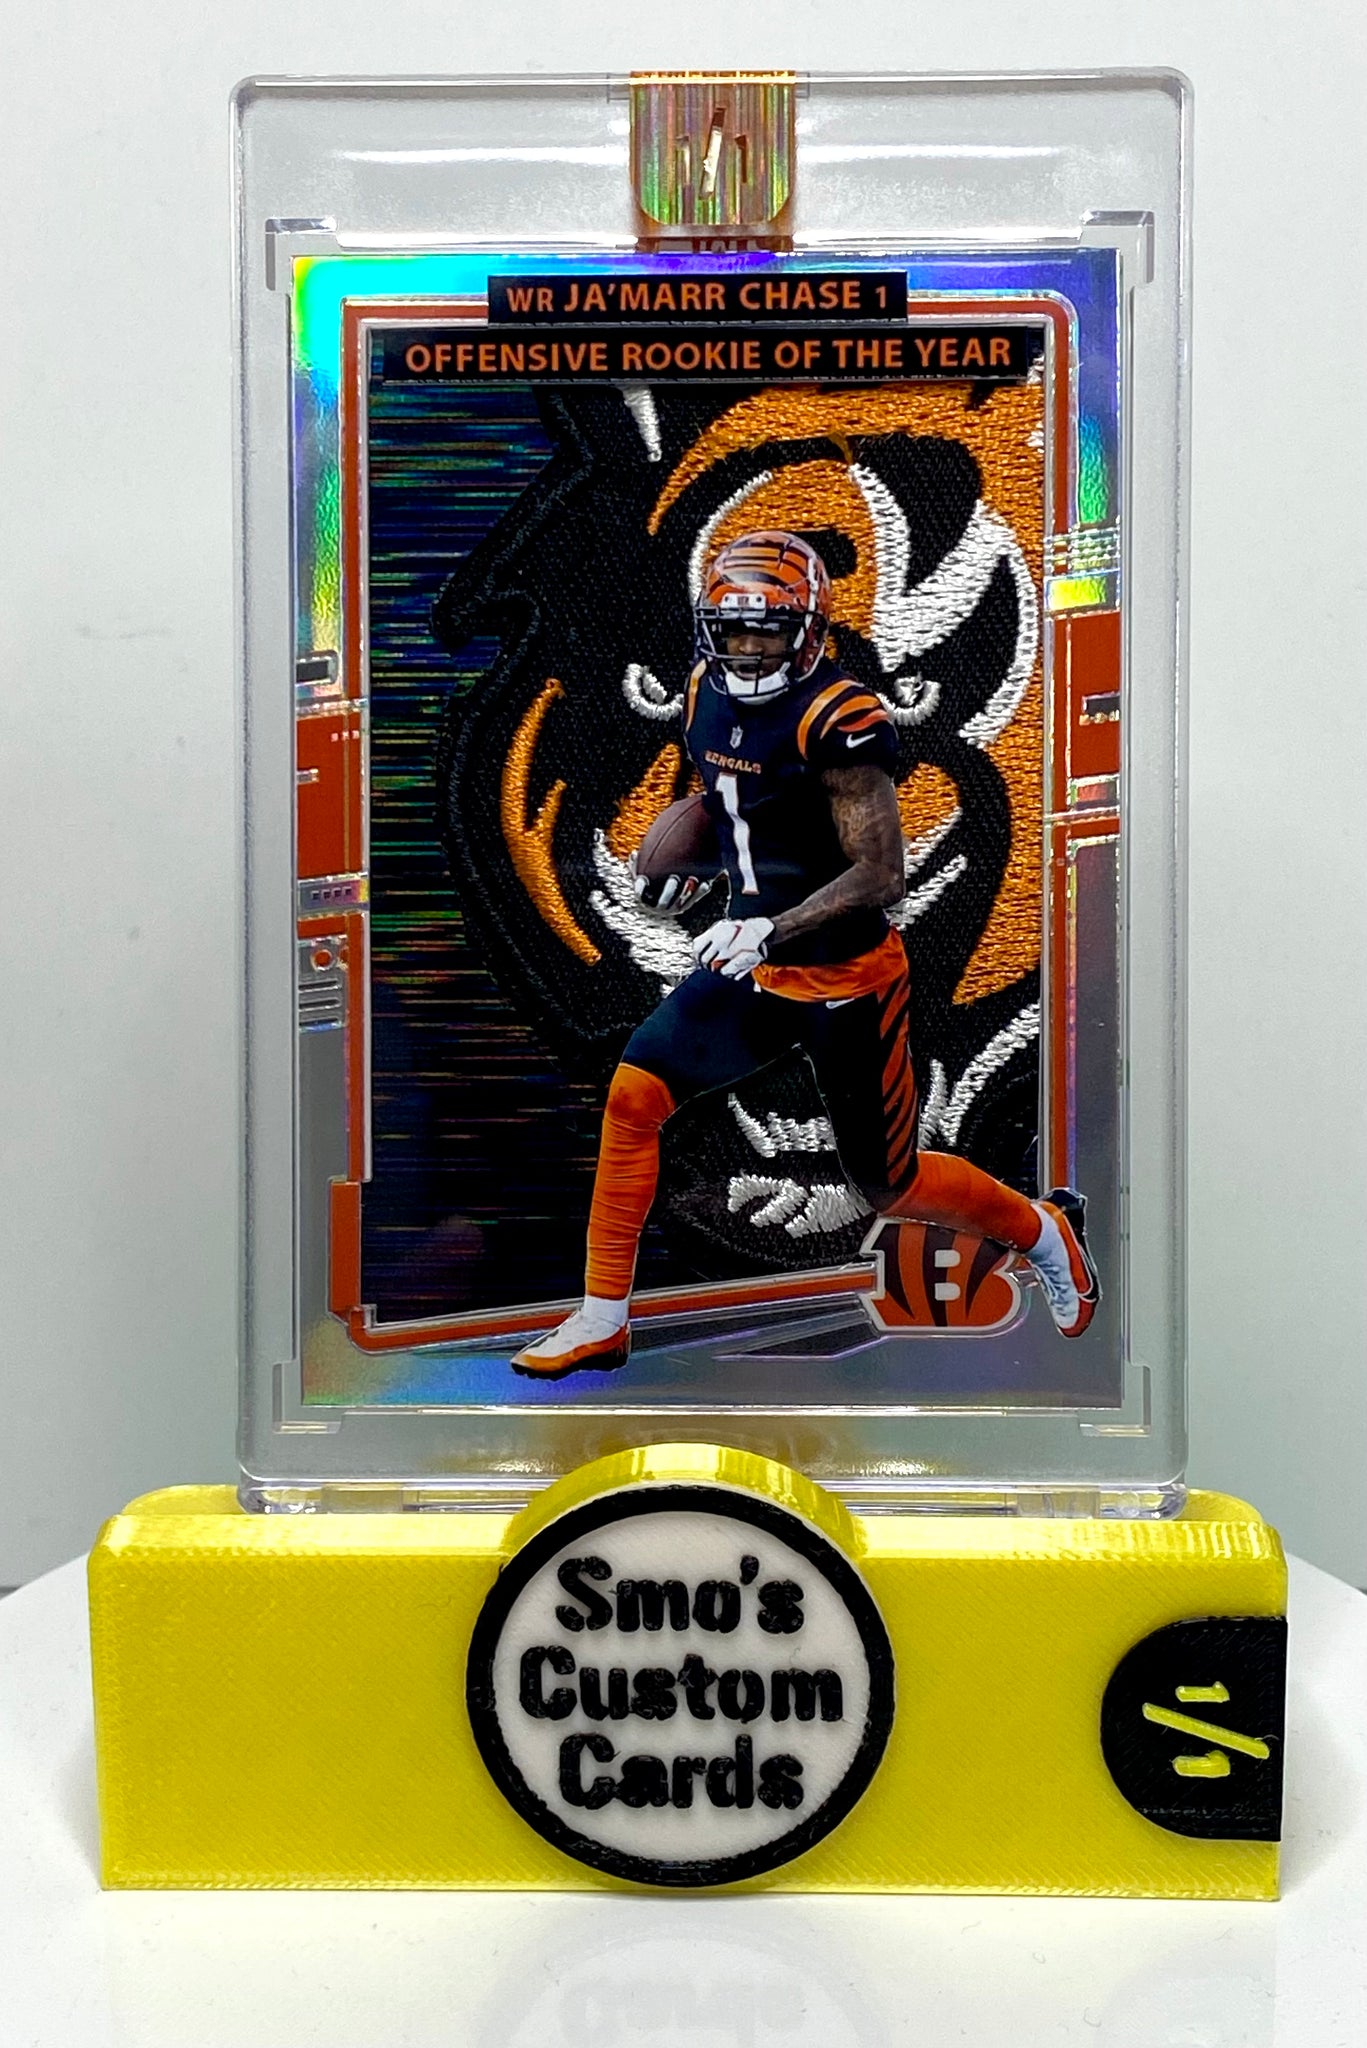 Ja’Marr Chase NFL Offensive Rookie of the Year Bengals Patch 1/1